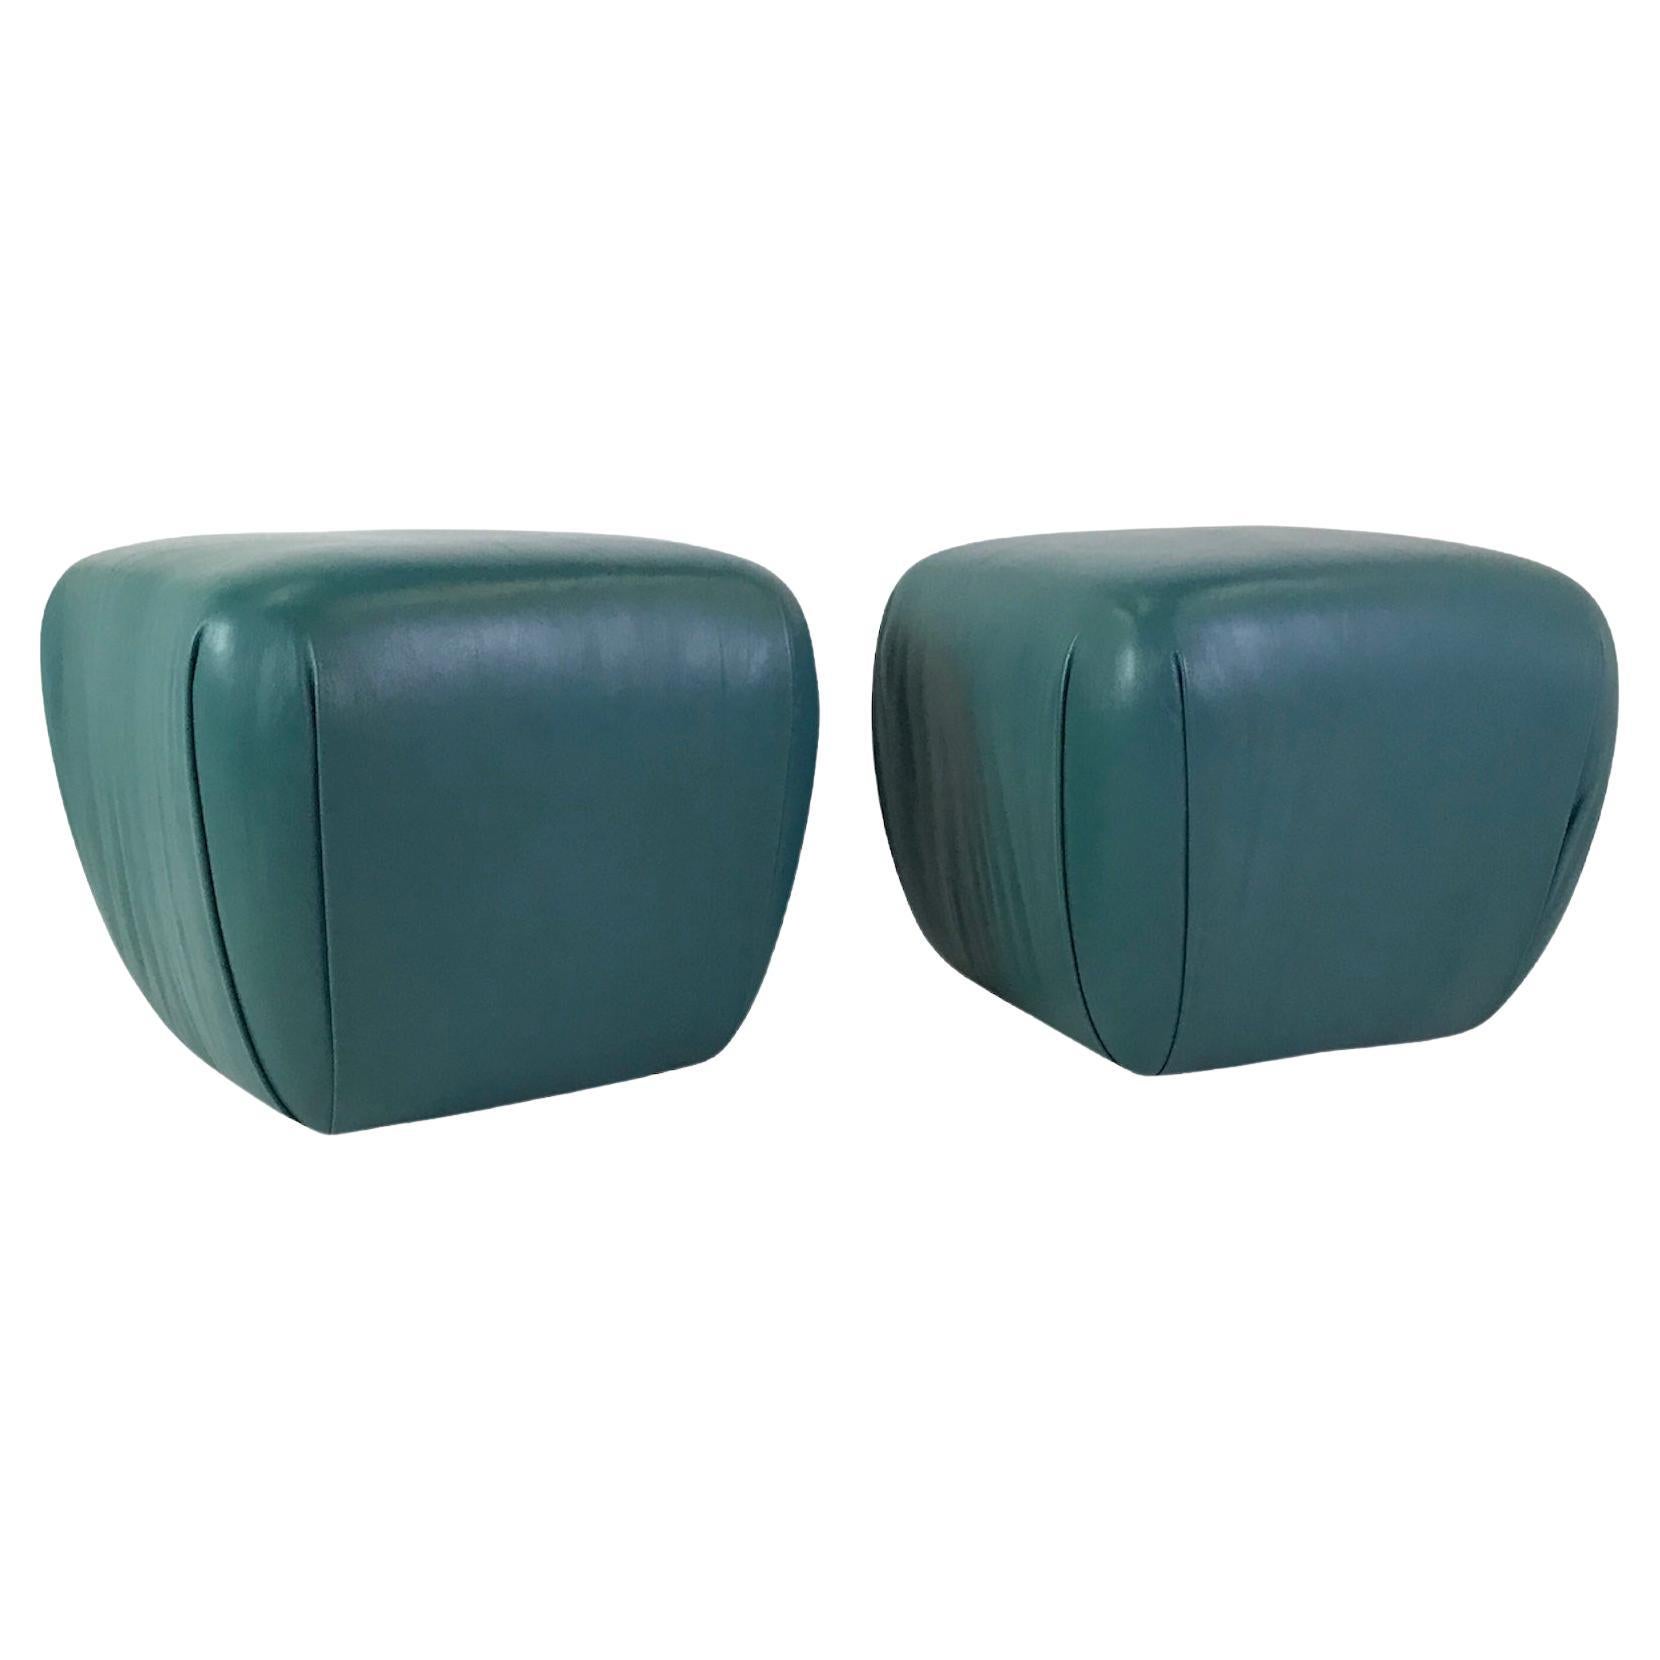 Pair of 1980s teal color leather ottomans by Hancock & Moore for the legendary Naples, Florida design firm Holland Salley, Inc. With a draped design, they slope down, becoming narrower at the bottom. Very faint marks to the leather on one ottoman,